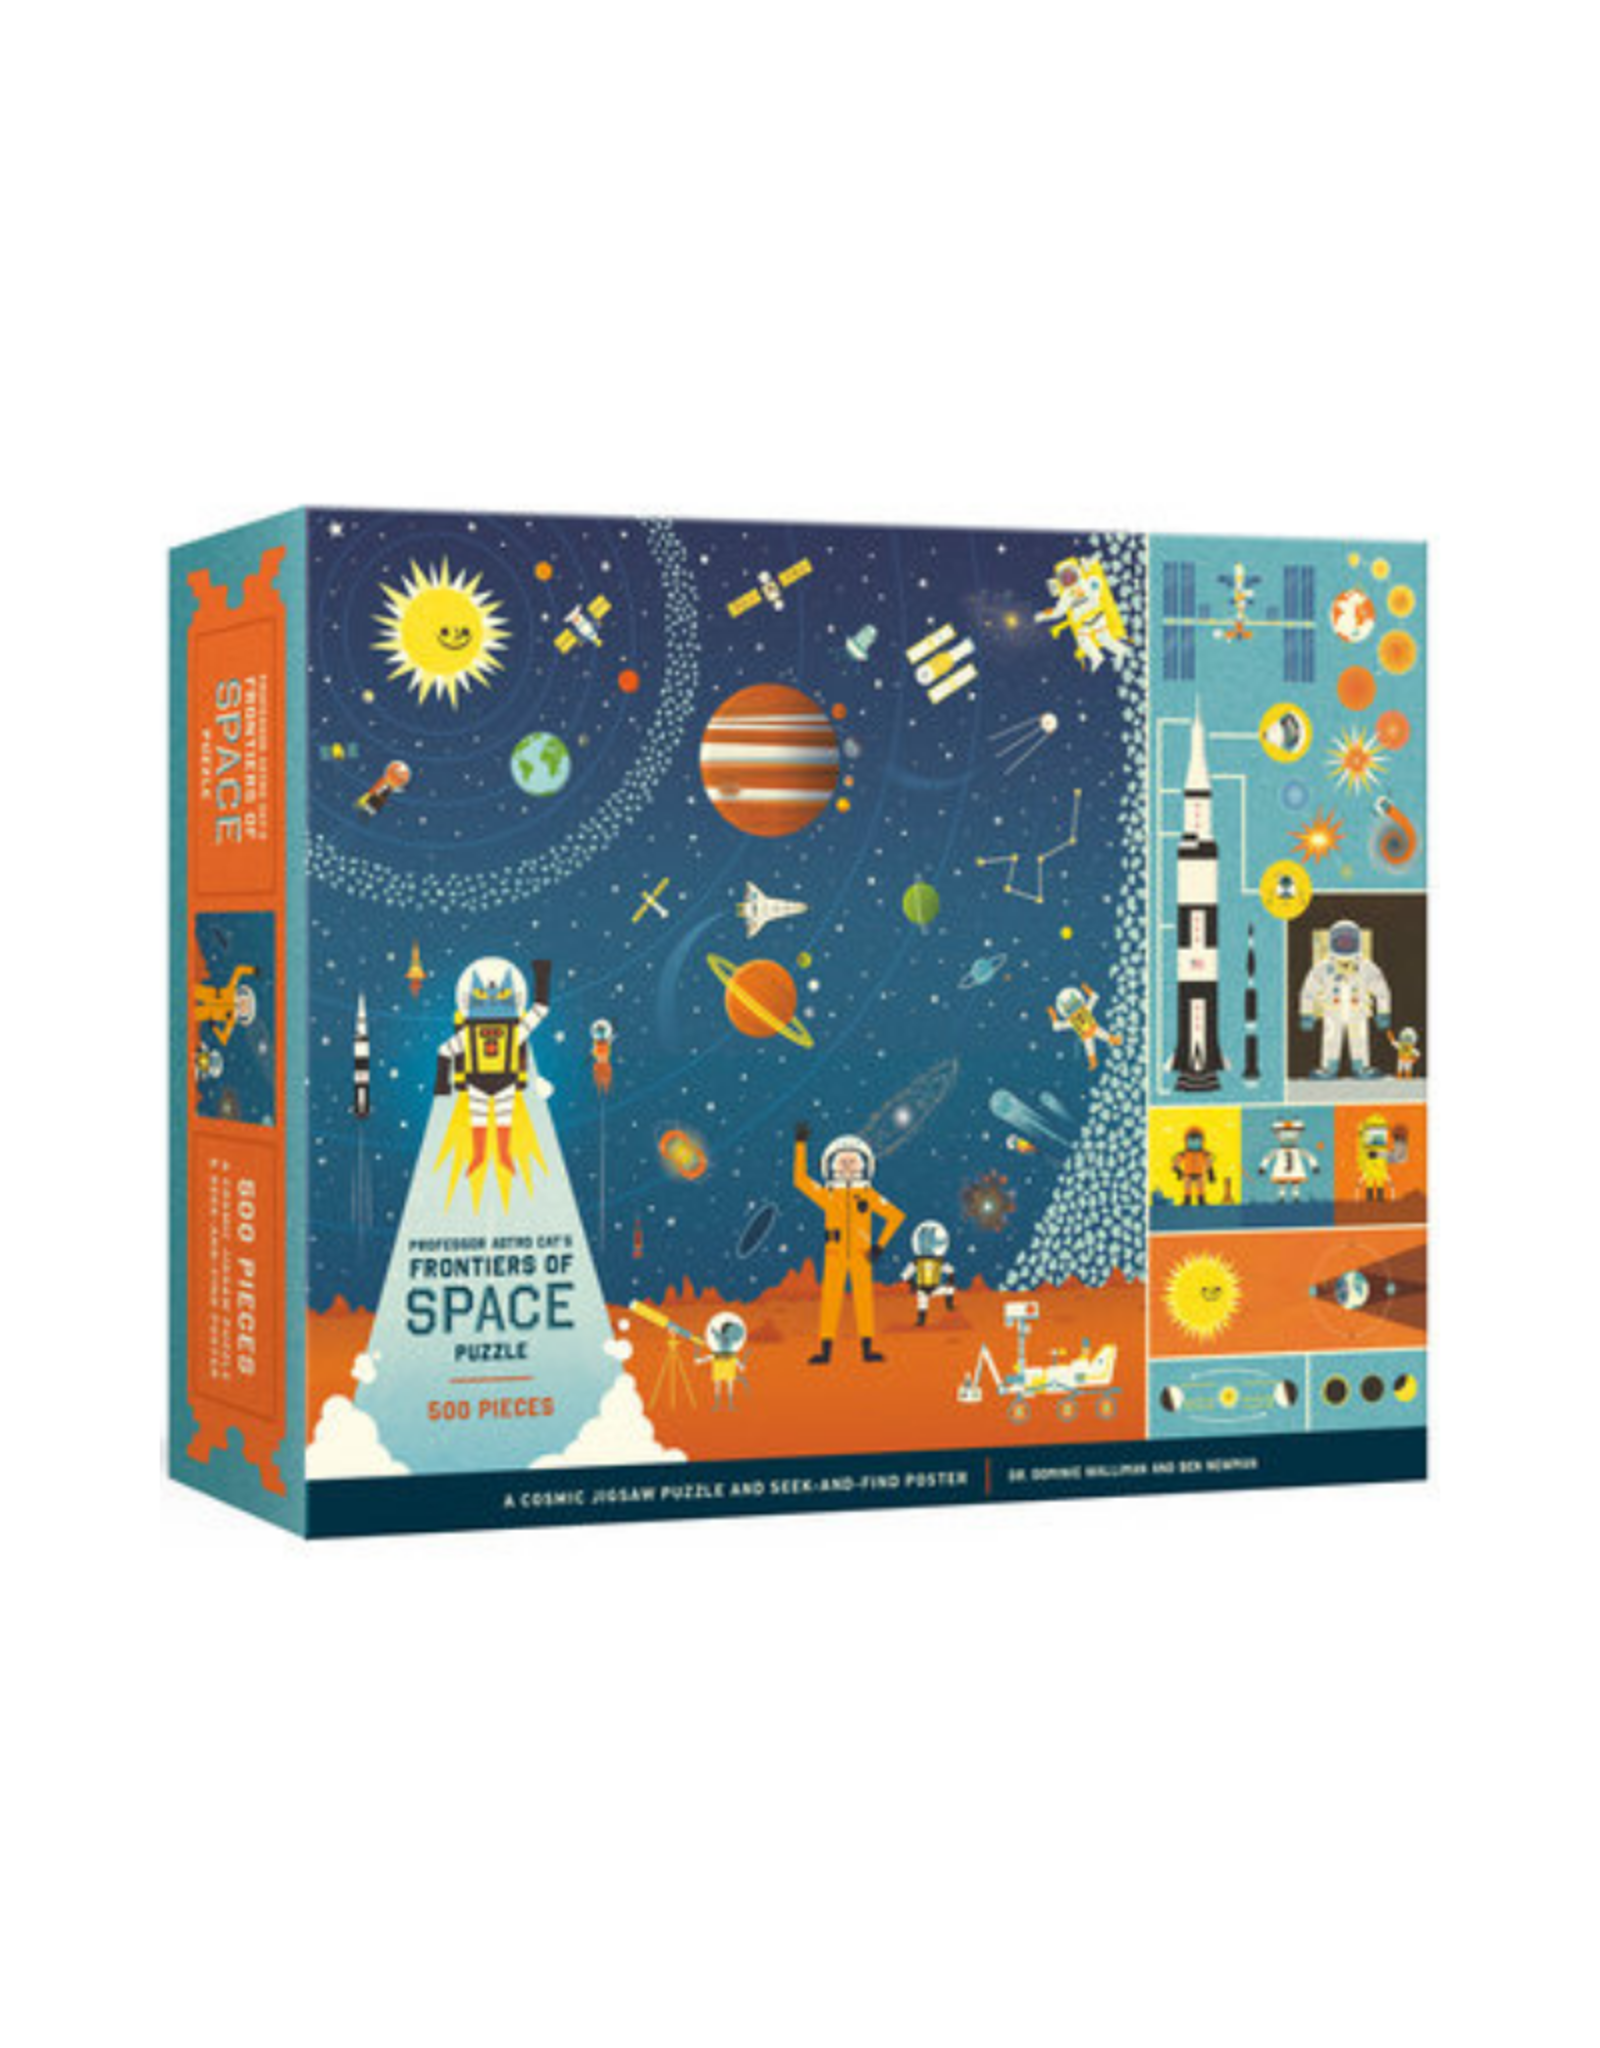 Professor Astro Cat's Frontiers of Space Jigsaw Puzzle - 500 Pieces